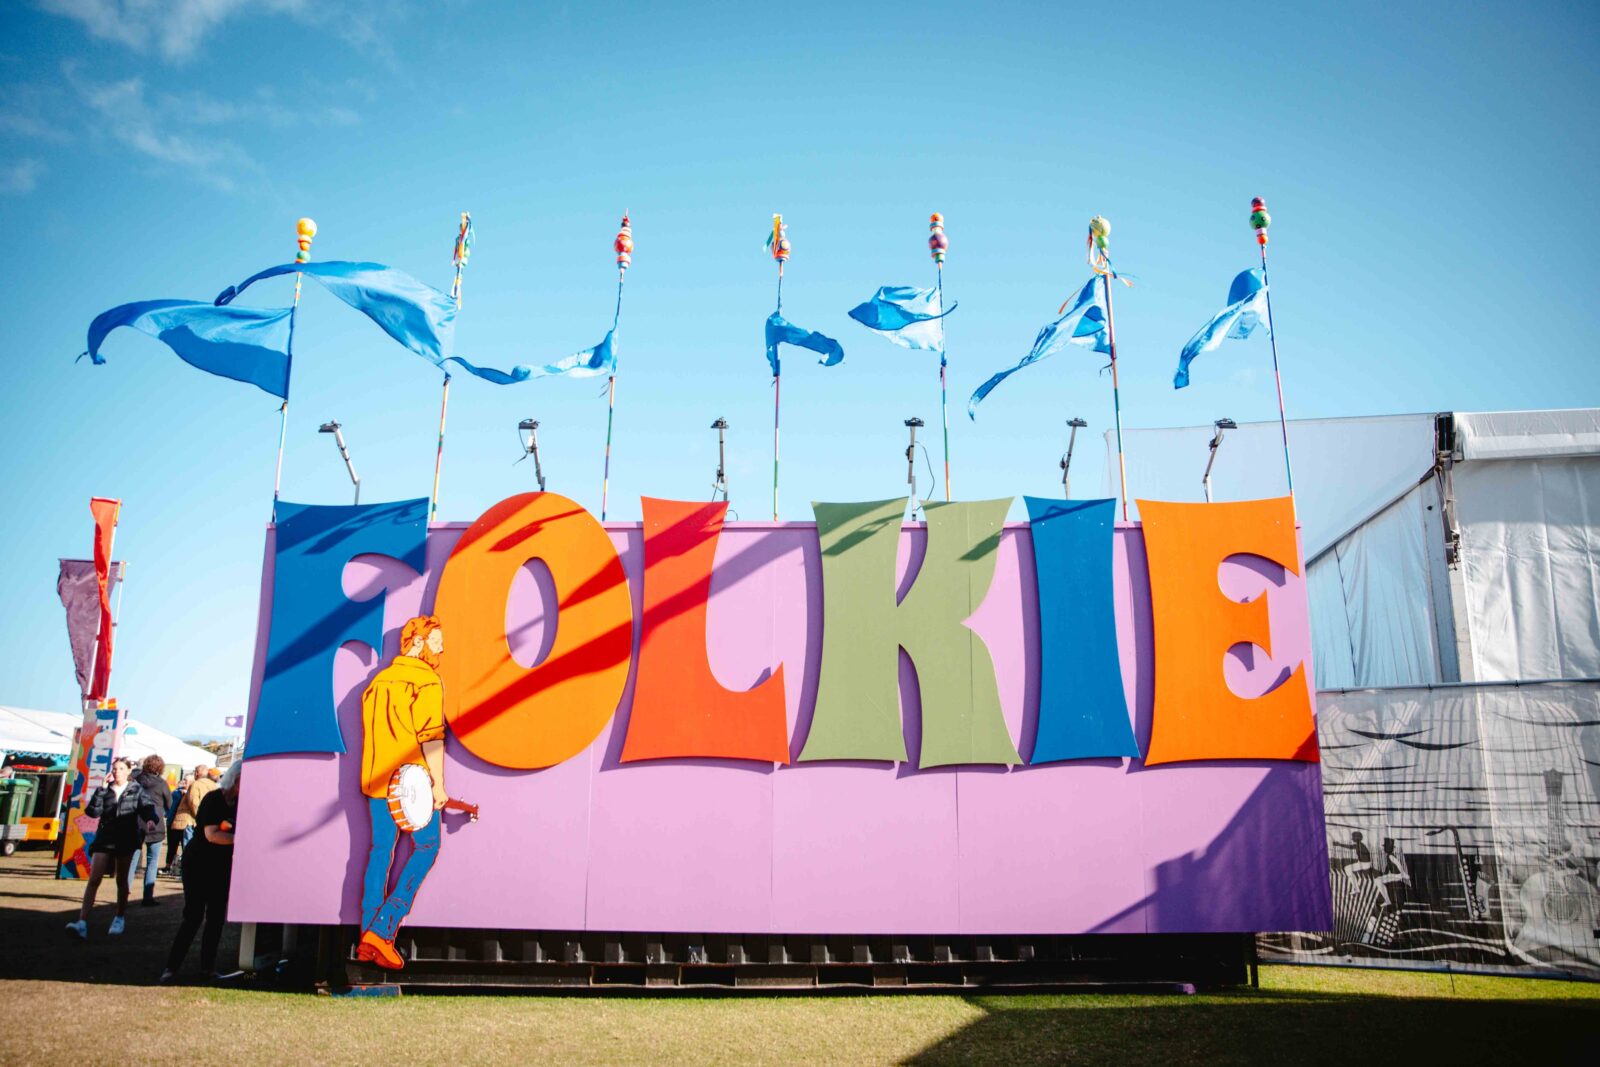 Artwork displaying the word "Folkie" and a man with a banjo inside the Port Fairy Folk Festival.